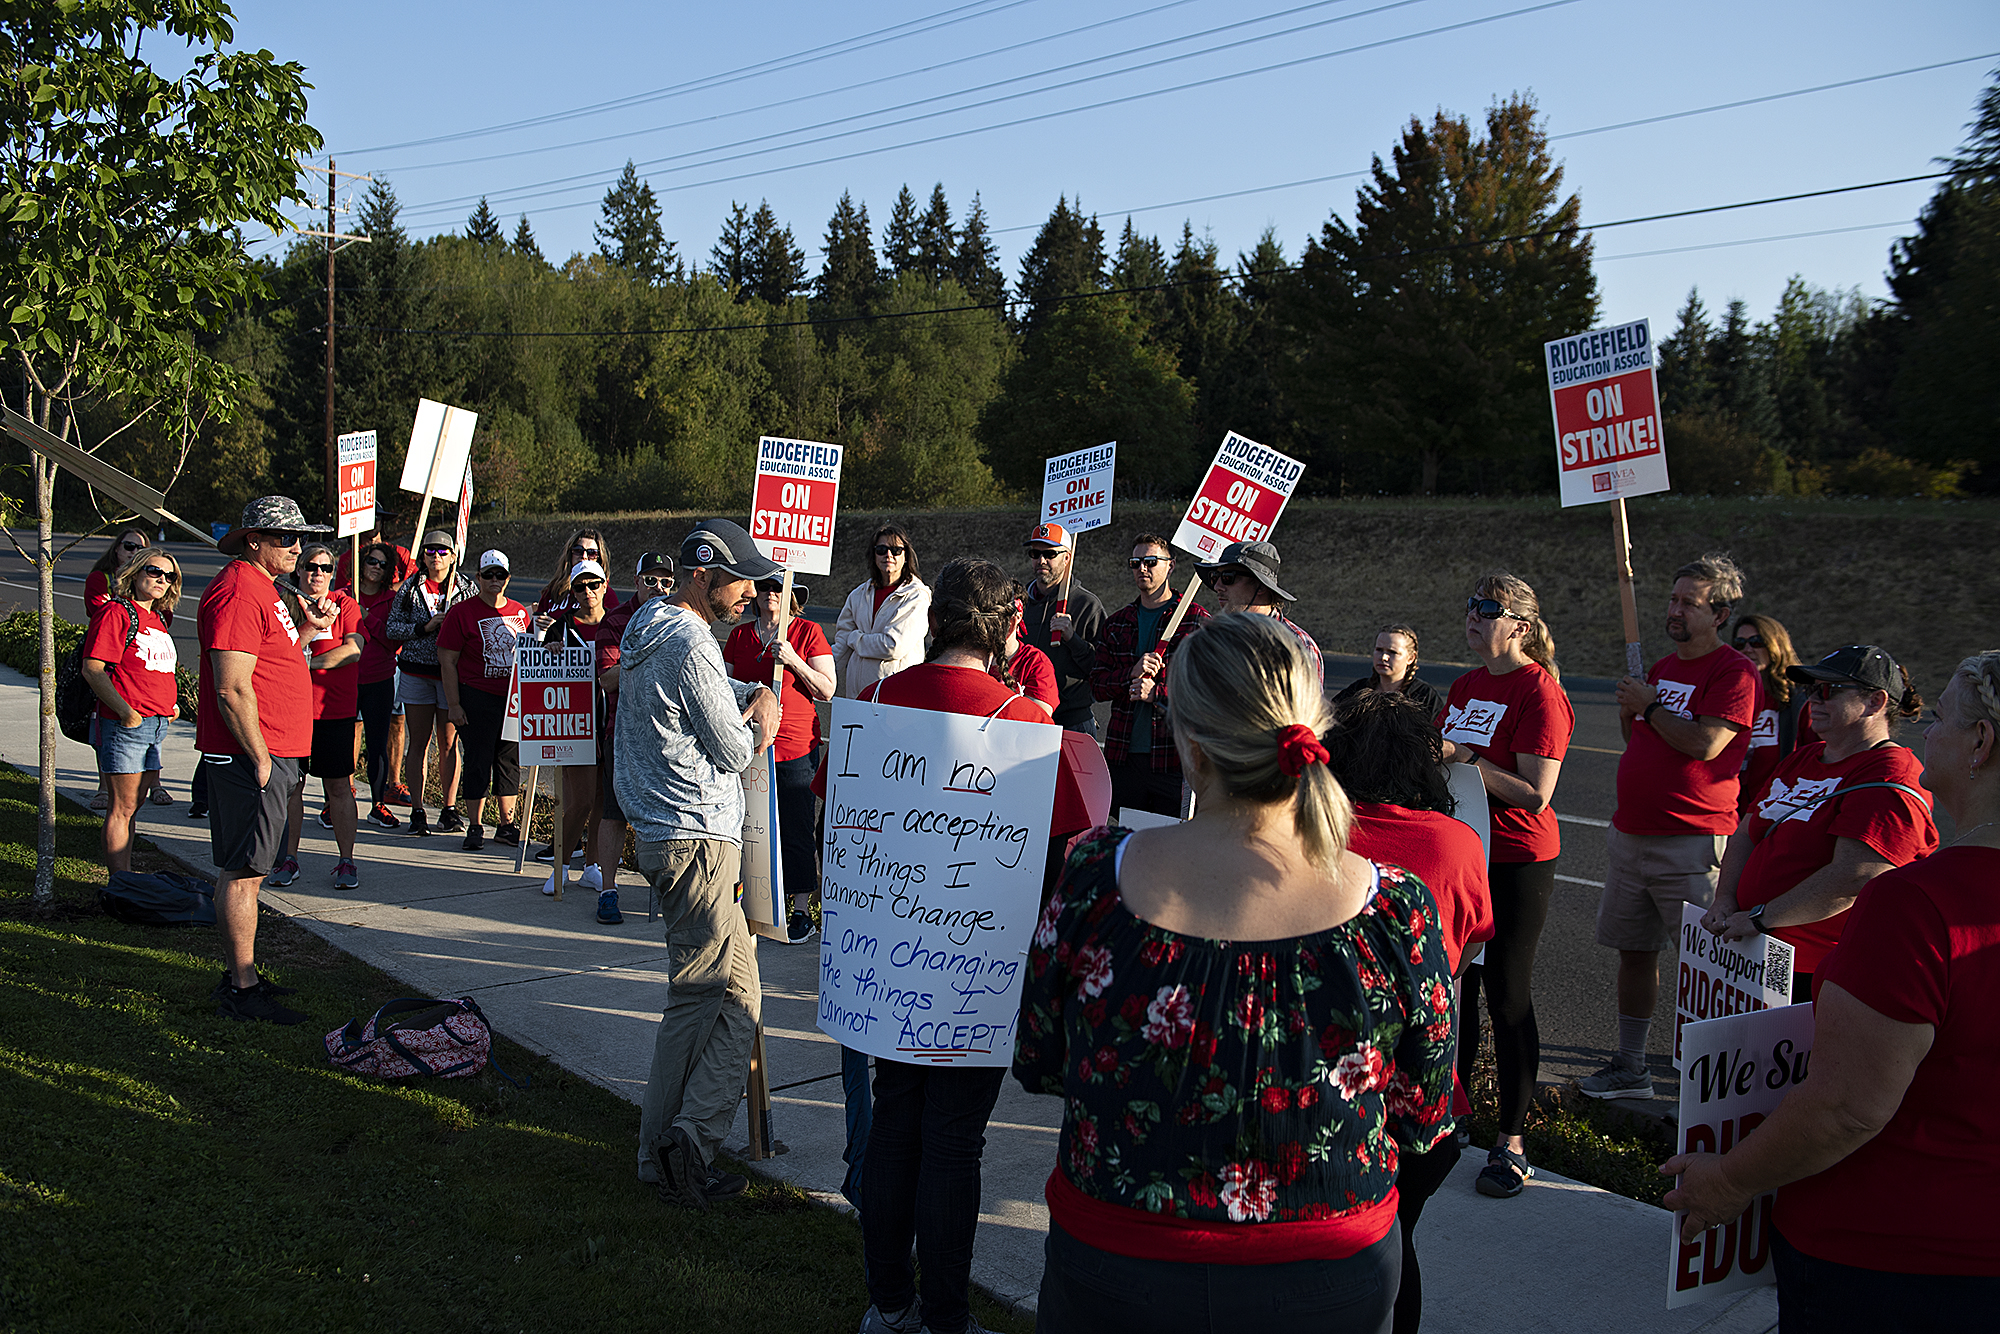 Joe Thayer, center in gray sweatshirt and hat, joins union members as they gather to strike after a deal has not been reached between the teachers union and school officials despite working without a contract since Sep. 1, as seen in Ridgefield on Friday morning, Sept. 9, 2022.